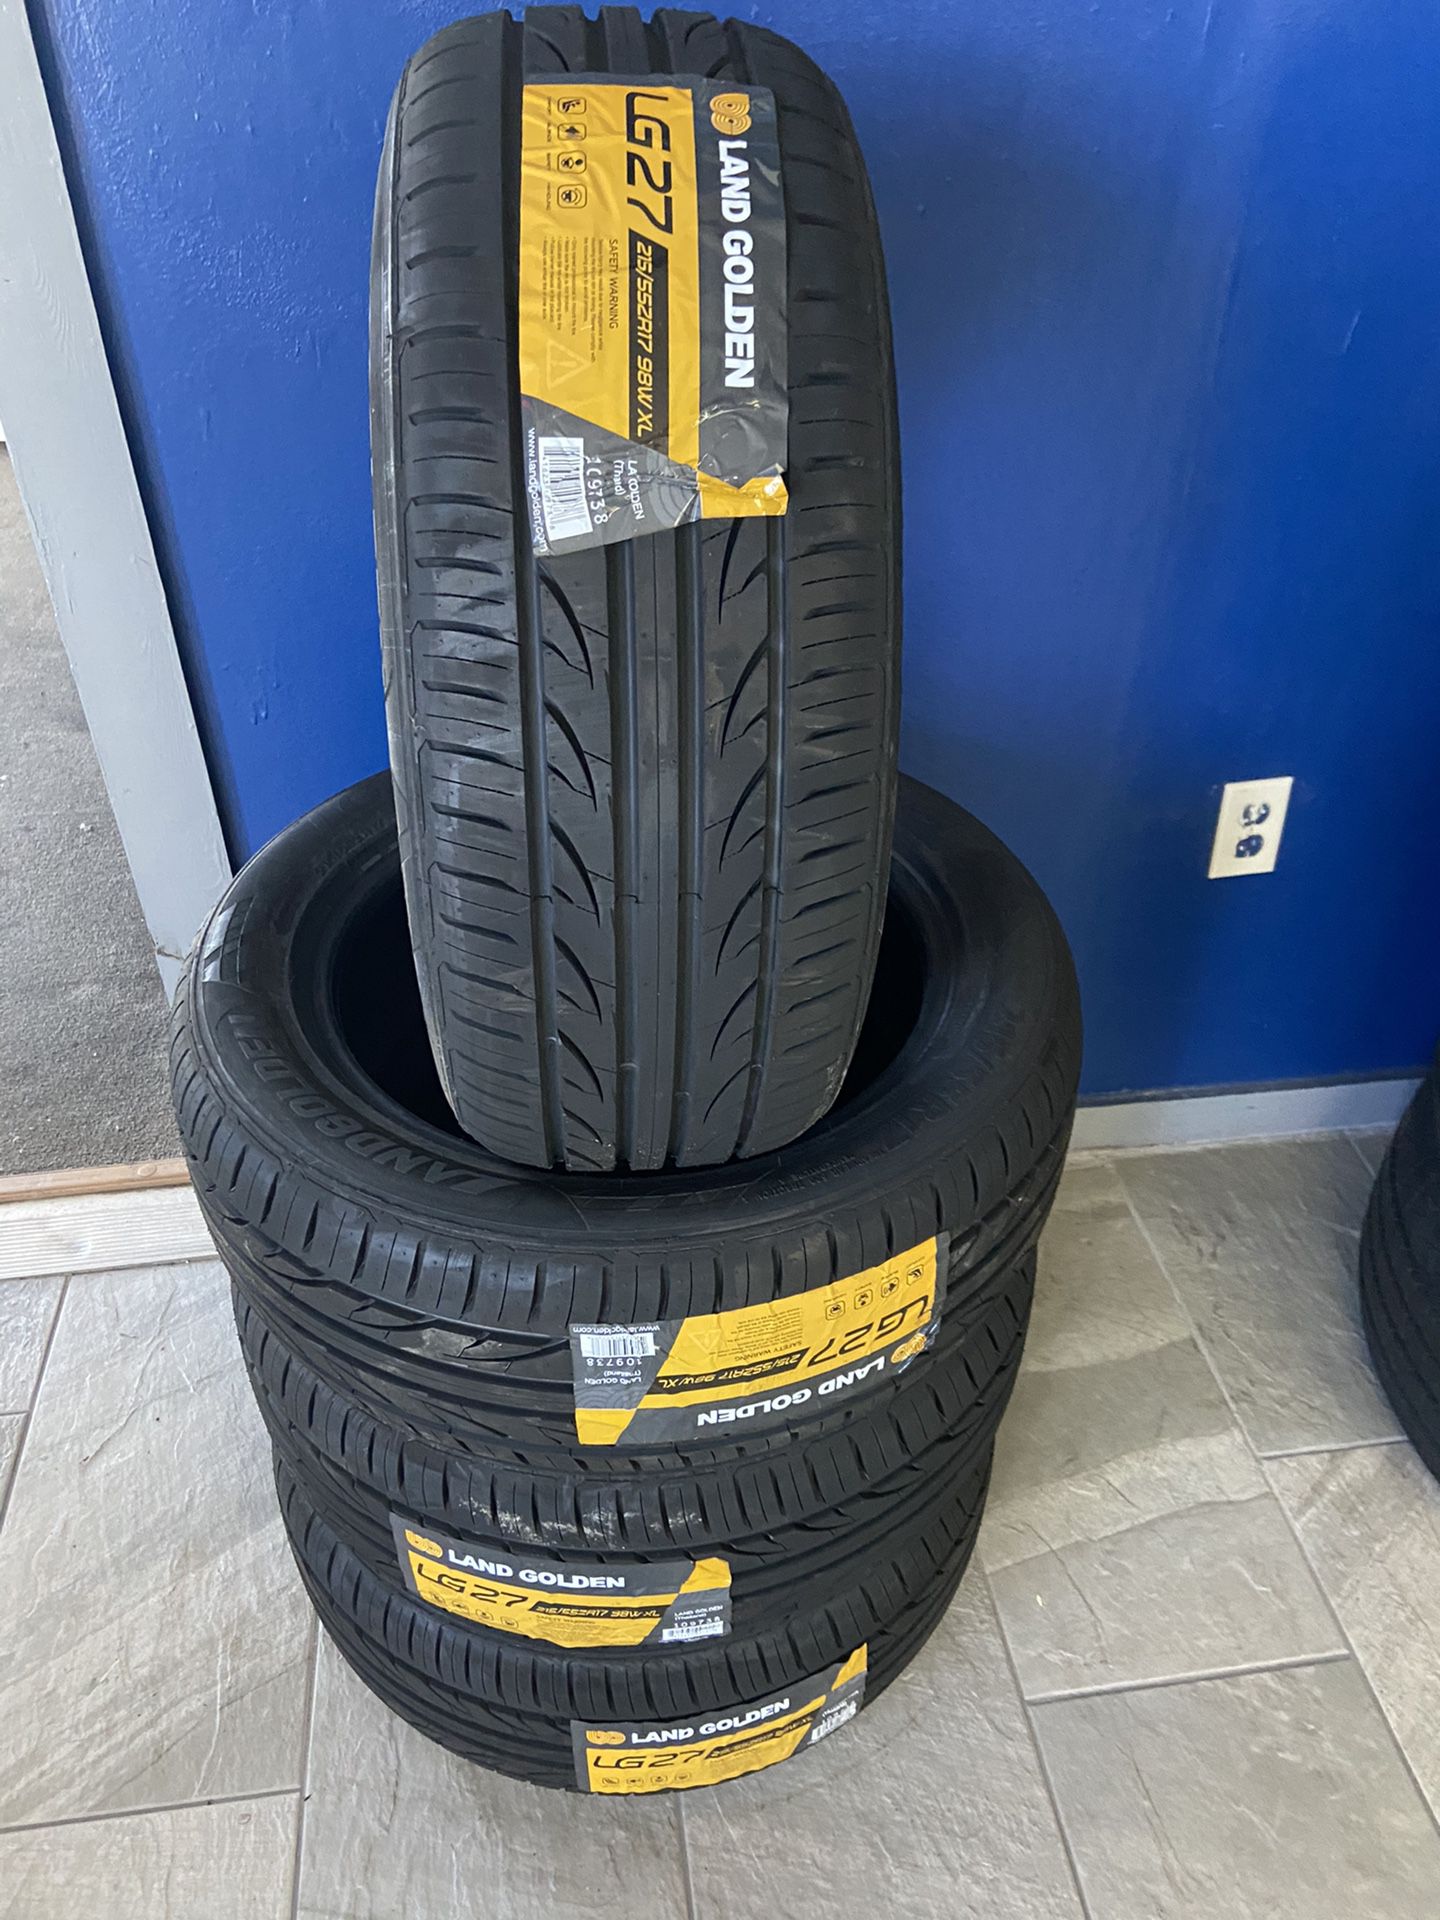 Tires and oil